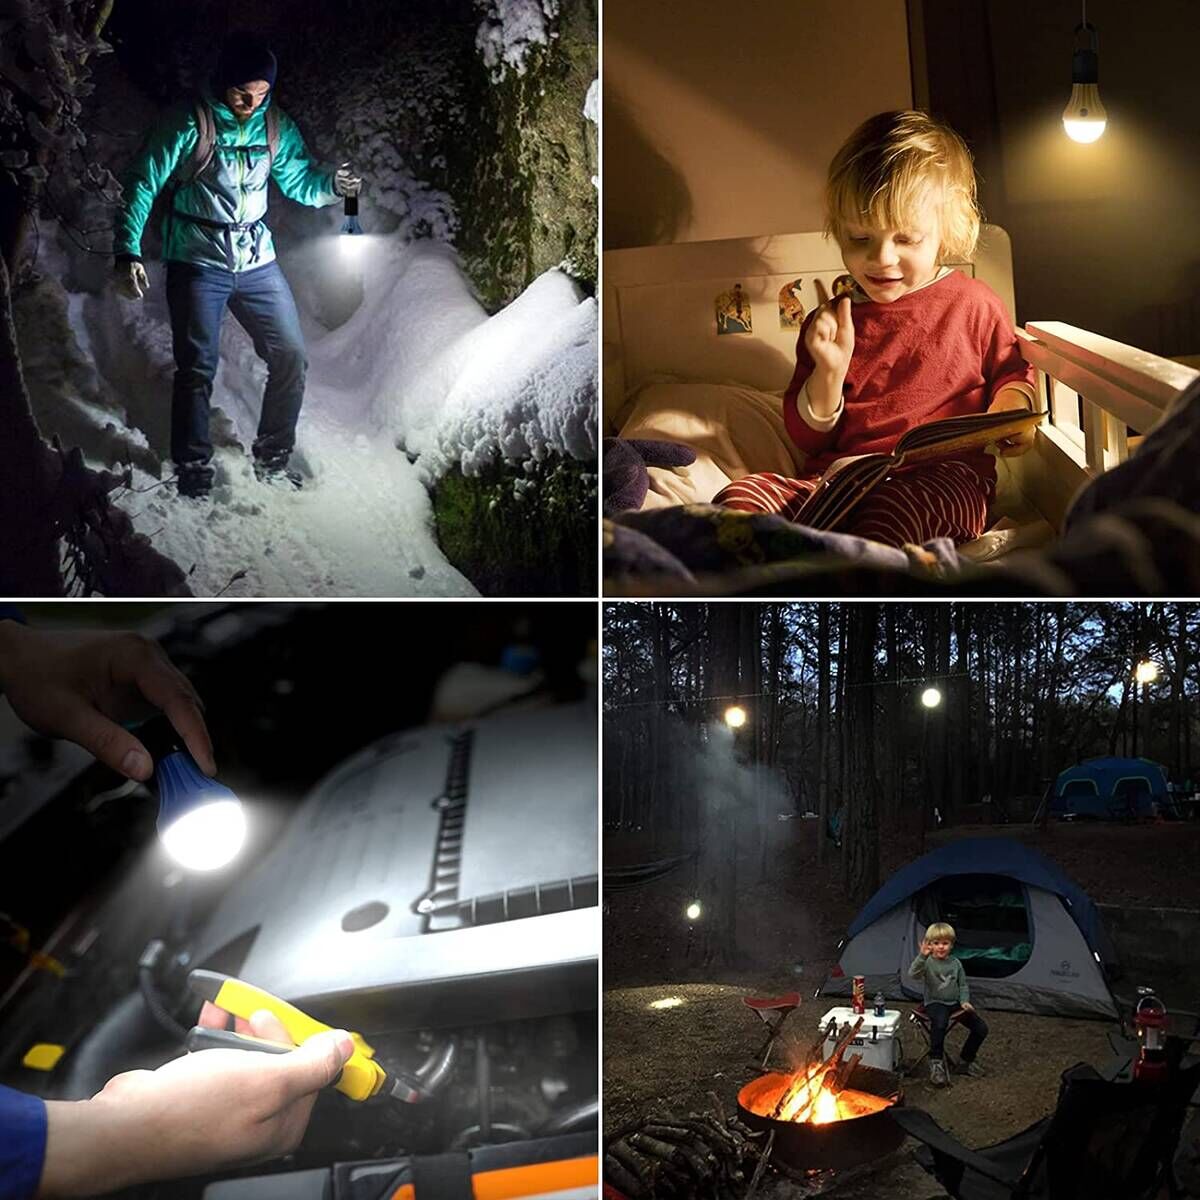 Camping Lights 5 Pack, Portable Camping Light 4 Lighting Modes, Battery  Operated Hanging Tent Light LED Camping Tent Lantern Camping Equipment for  Camping Hiking Backpacking Fishing Outage